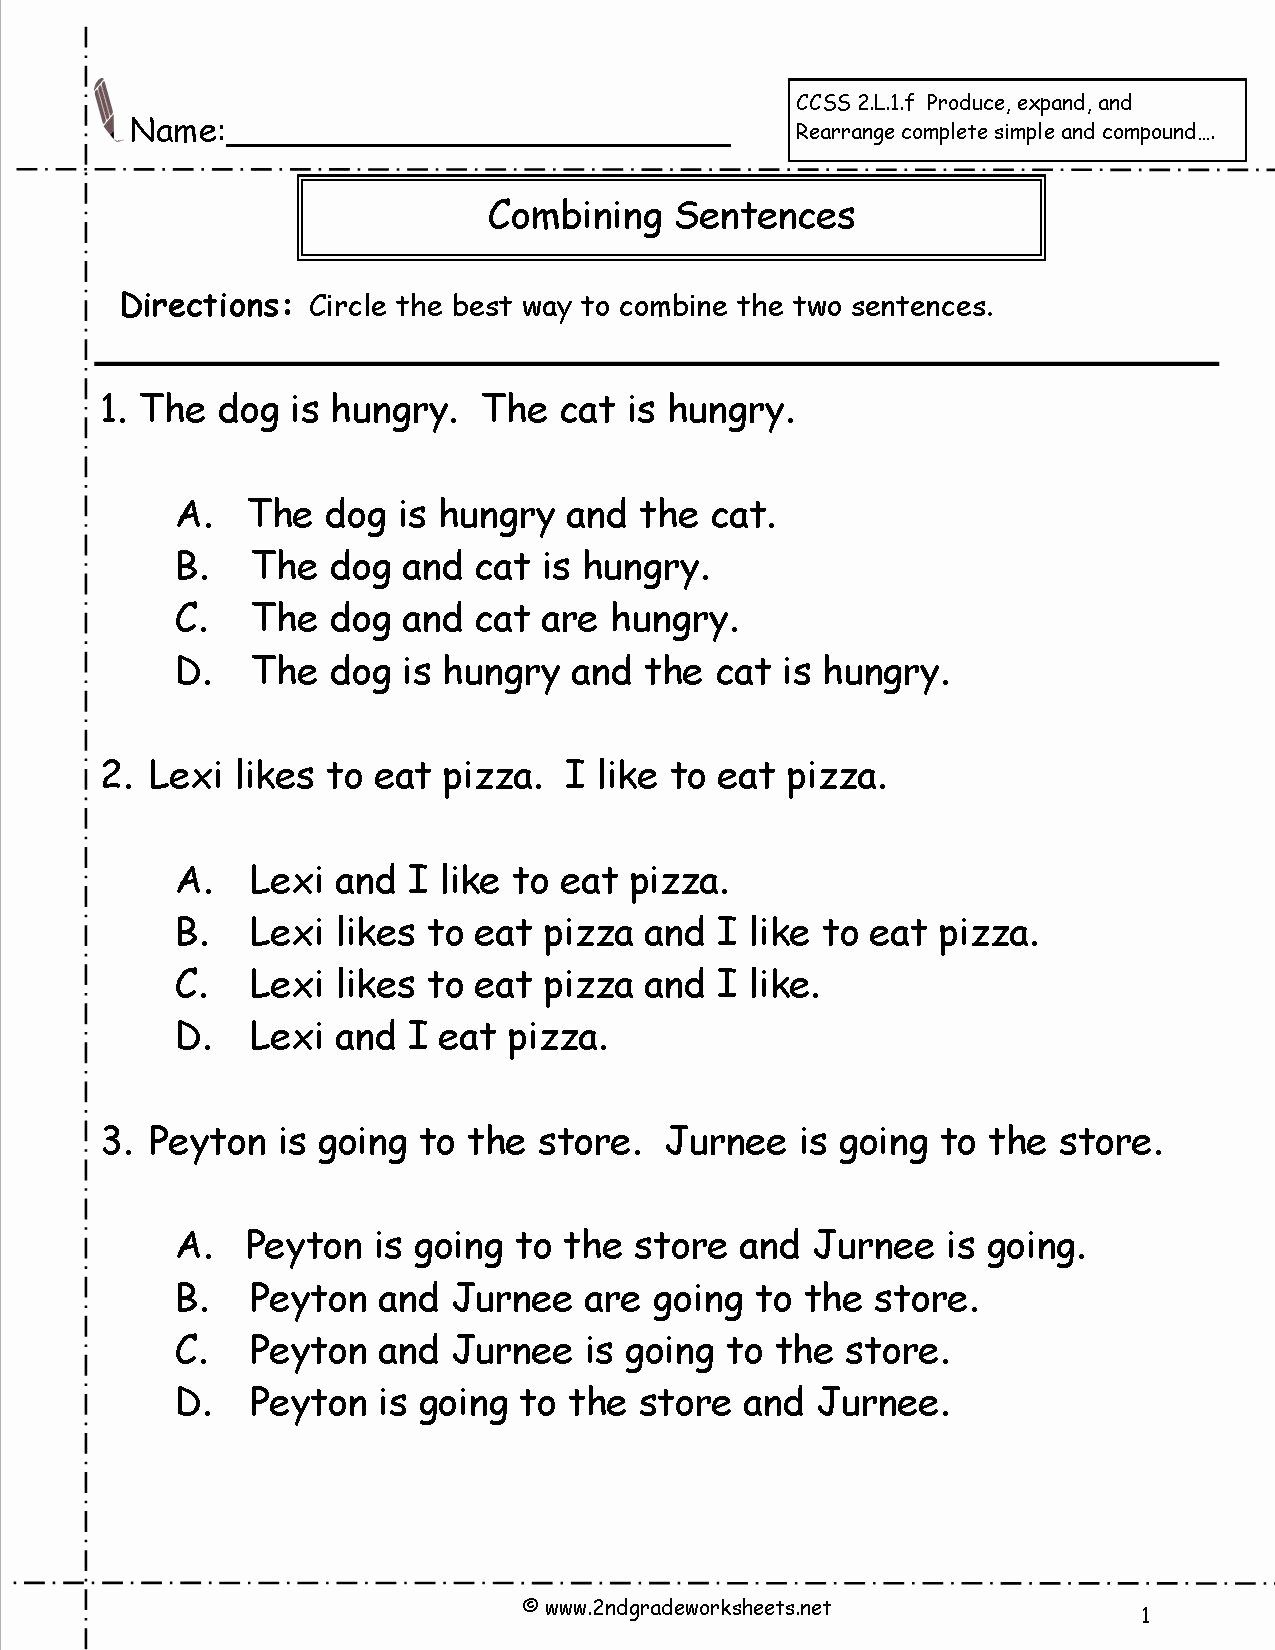 50-simple-and-compound-sentence-worksheet